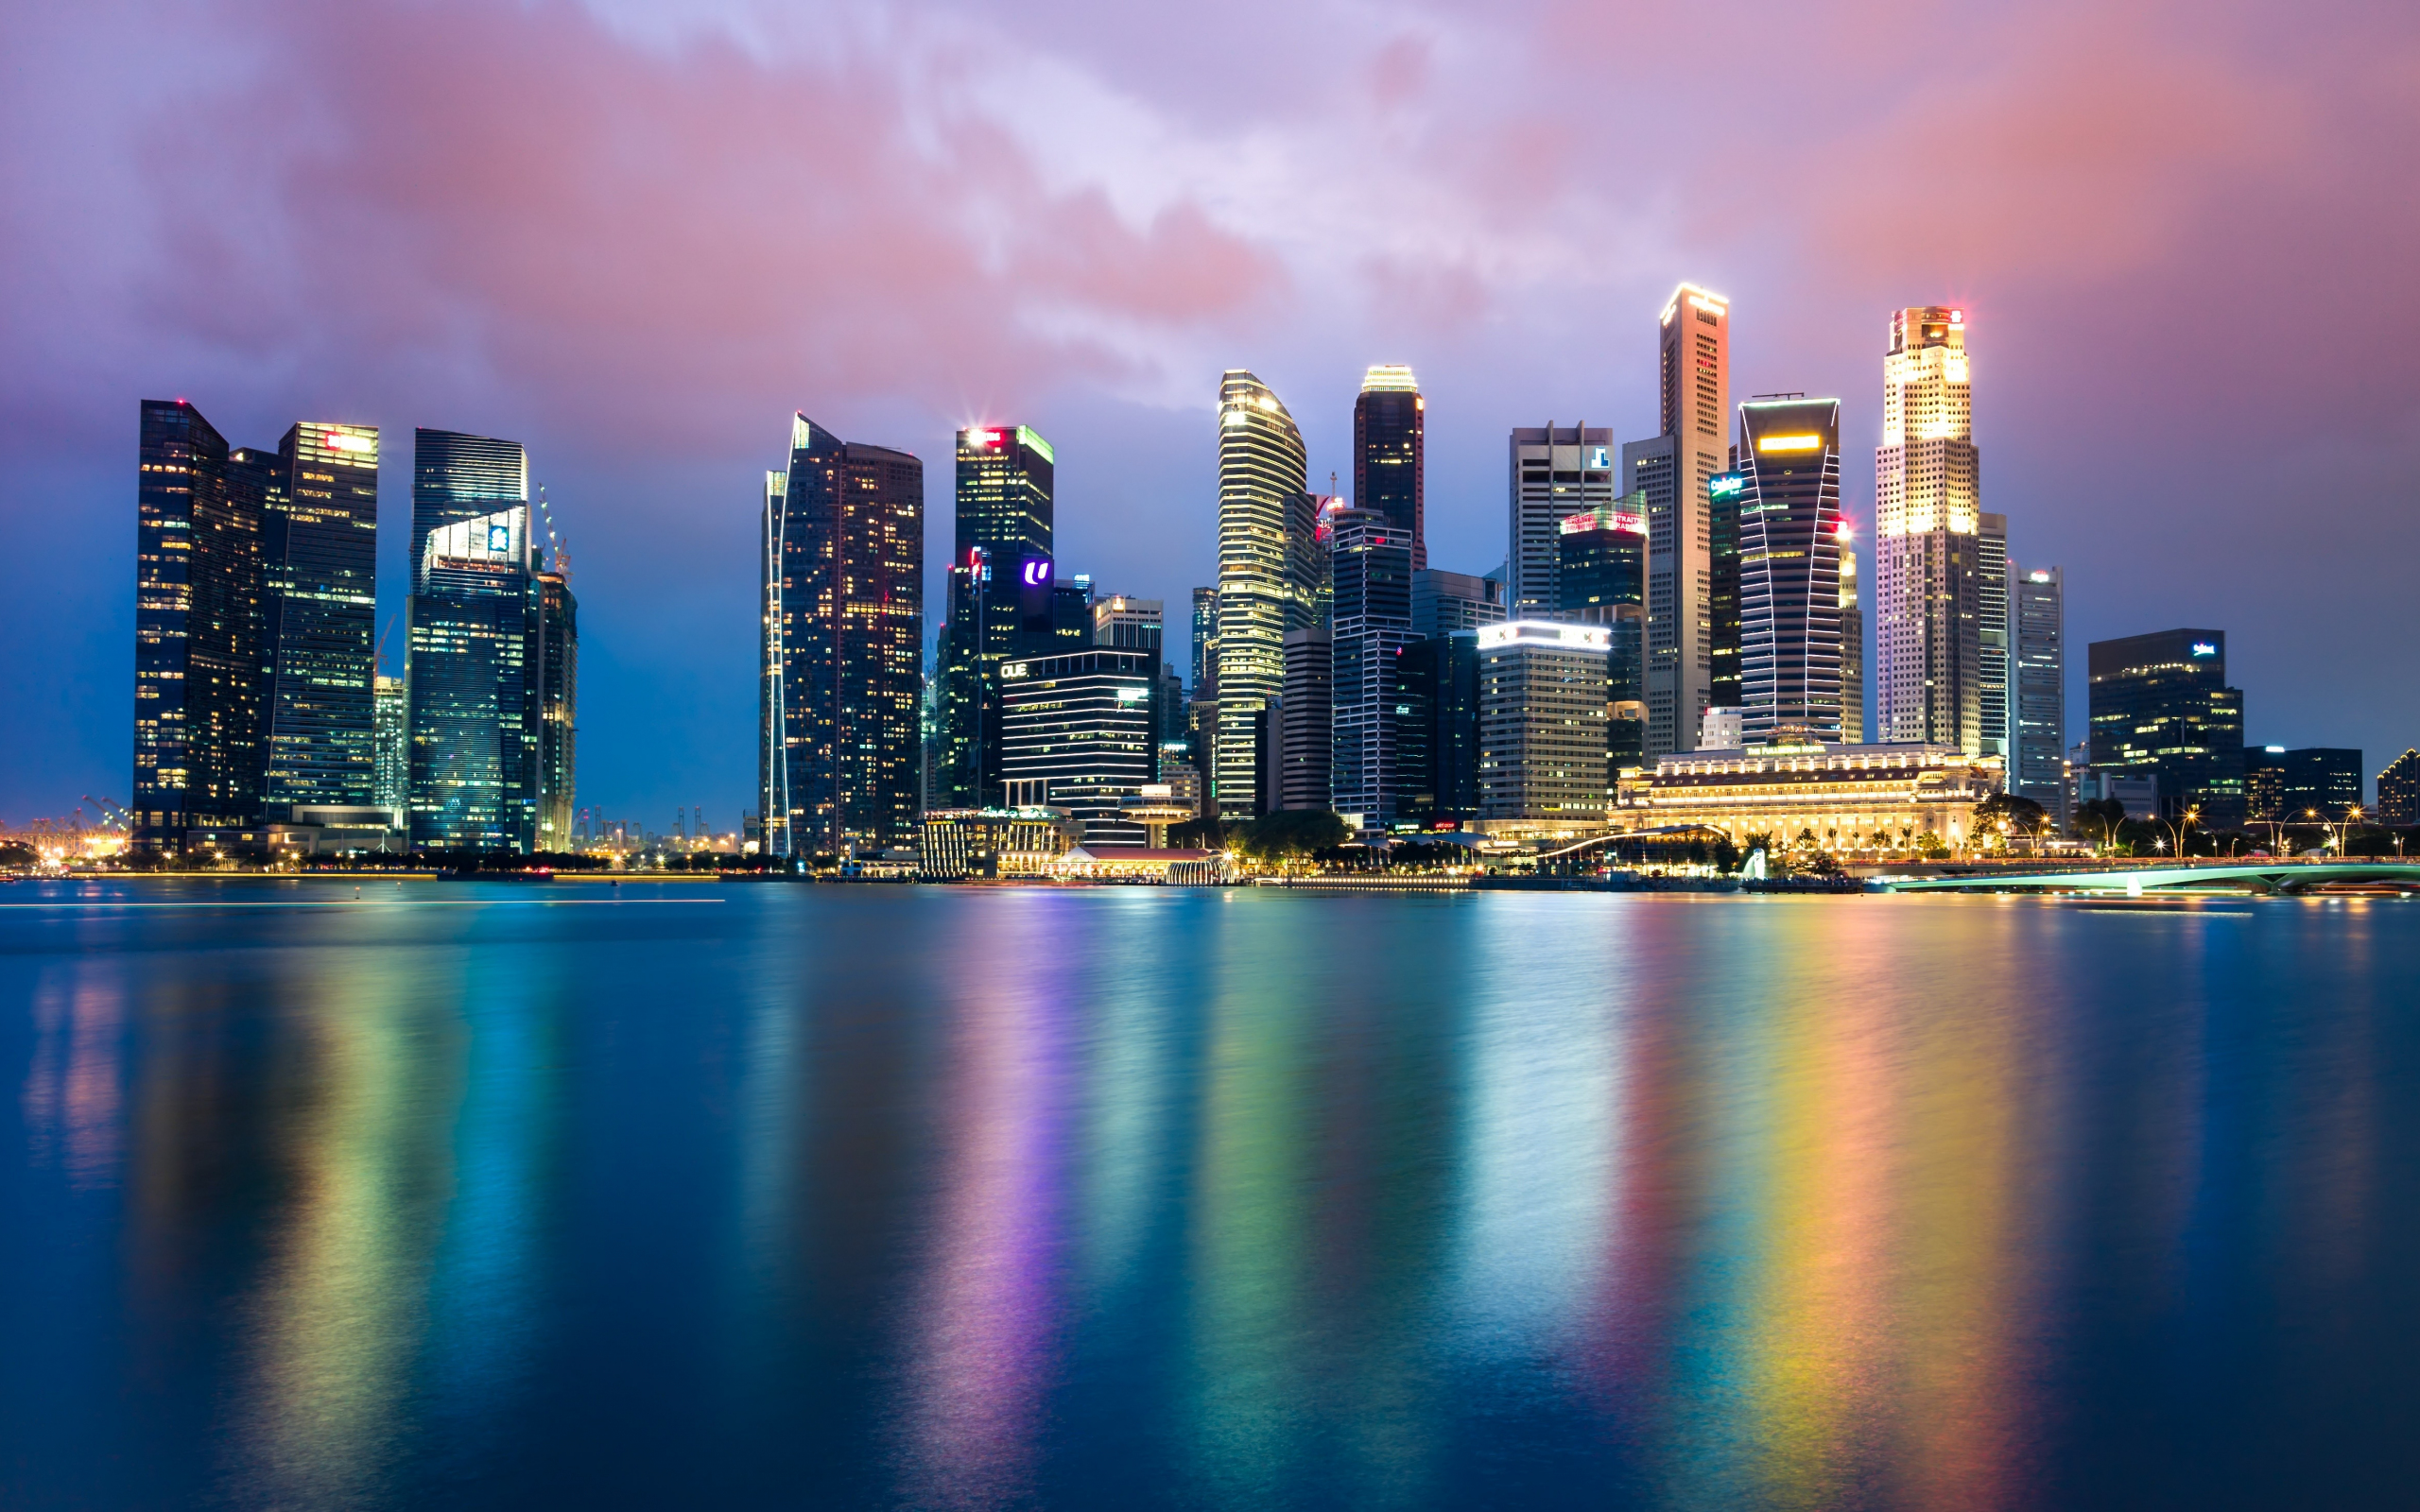 Download wallpaper 2560x1600 singapore, cityscape, skyline, reflections,  night, dual wide 16:10 2560x1600 hd background, 16384